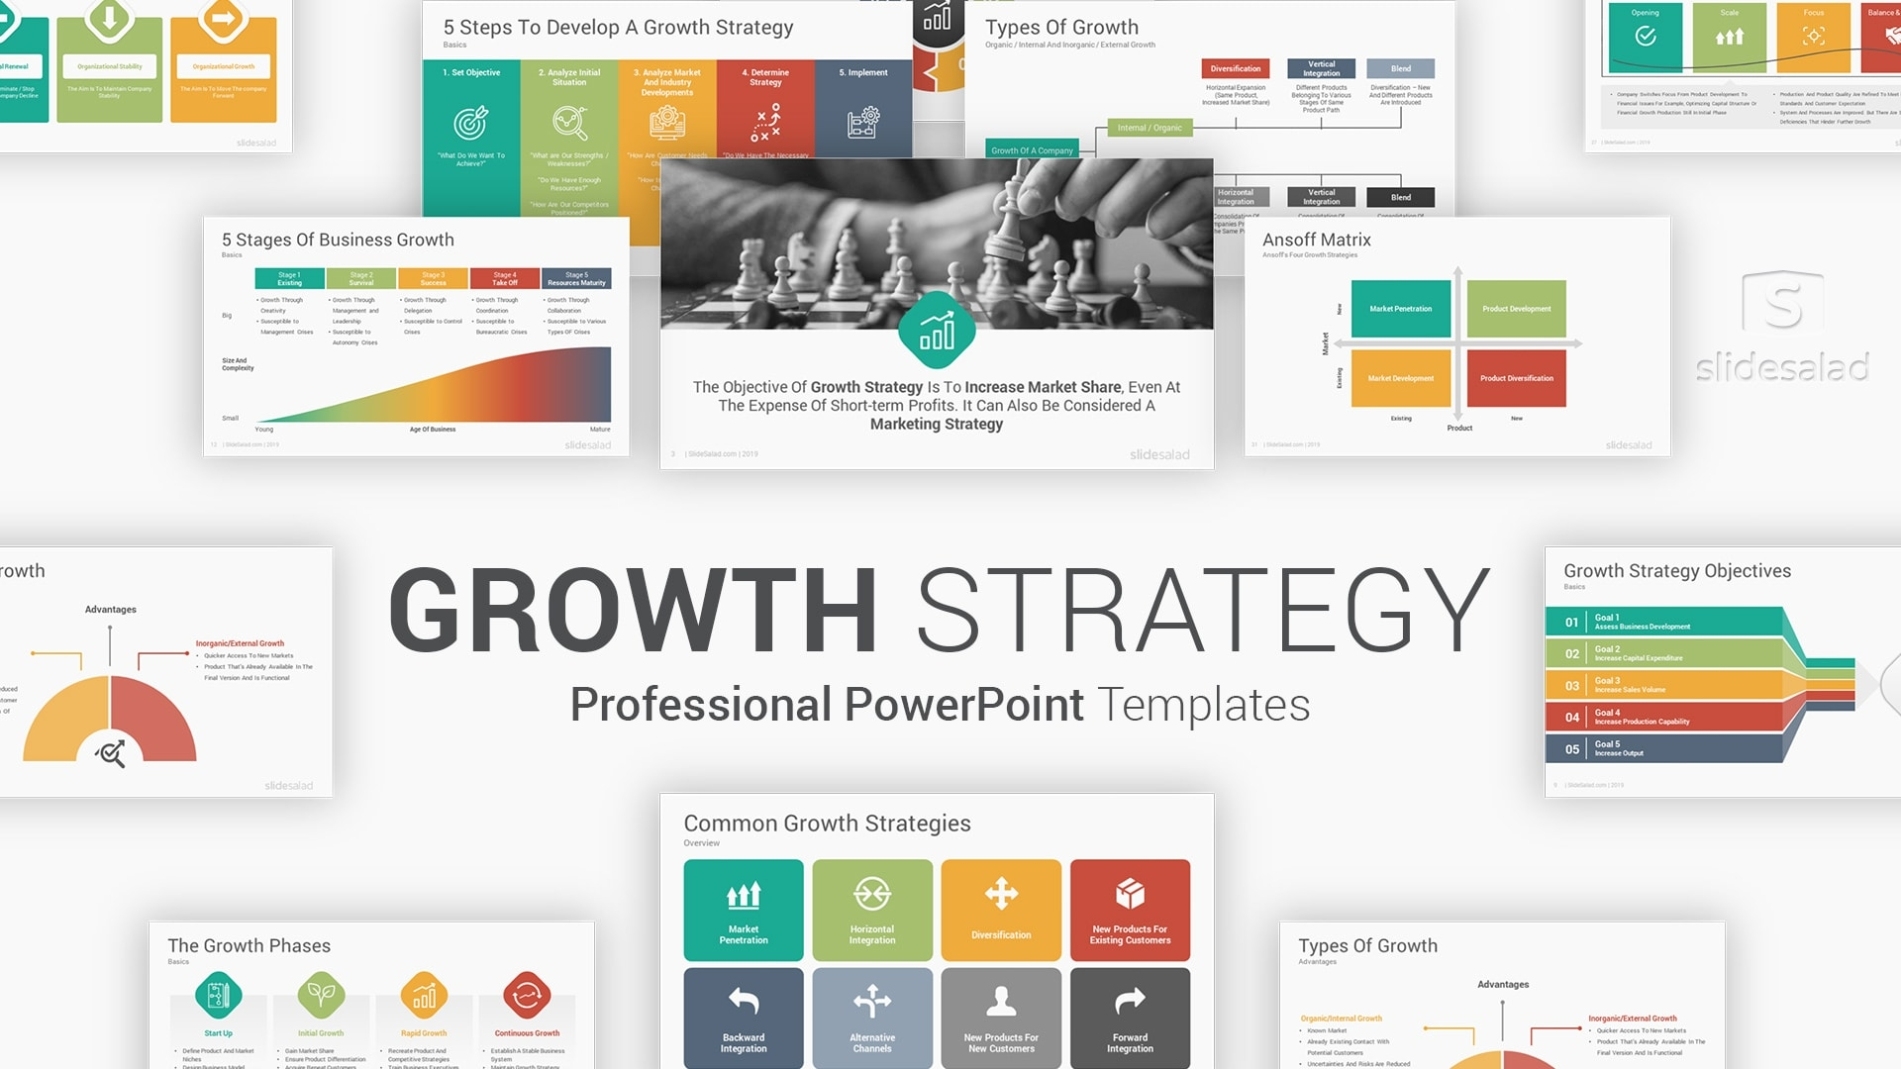 Best Business Plan Powerpoint Presentation Templates, 2021 - Slidesalad With Regard To Business Plan Template Powerpoint Free Download